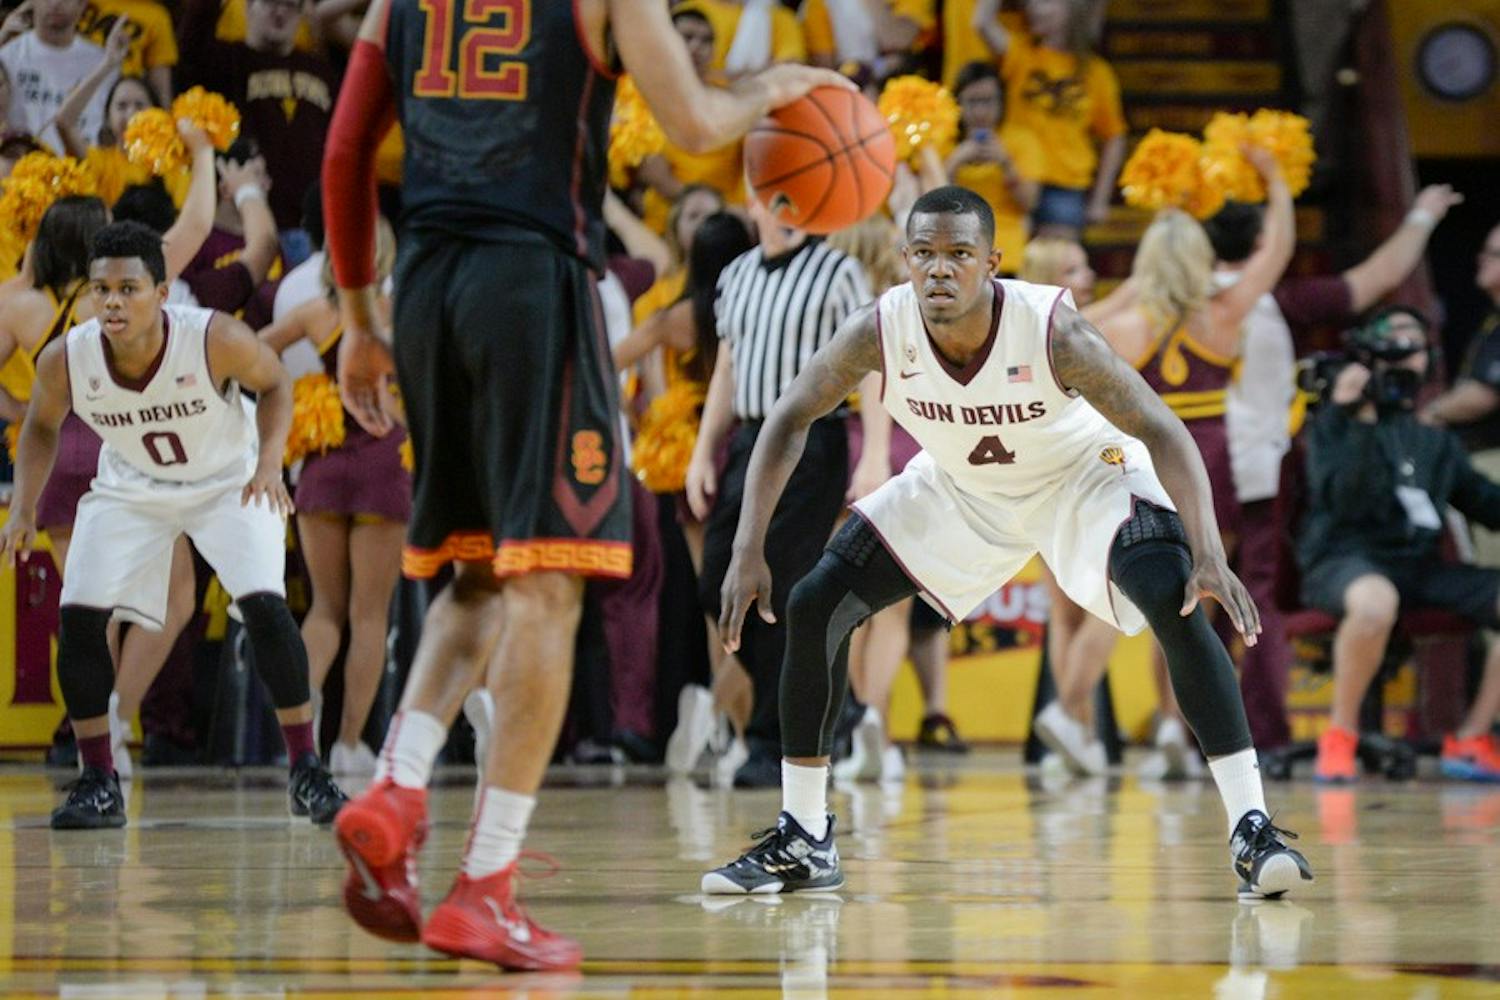 Junior guard Gerry Blakes stands formidably against the USC offense on Feb. 22, 2015, at the Wells Fargo Arena. The strong defense by Blakes and the entire Sun Devil team along with keen with a offense would lead the Sun Devils to a 64-59 victory over the Trojans. (J. Bauer-Leffler/The State Press)